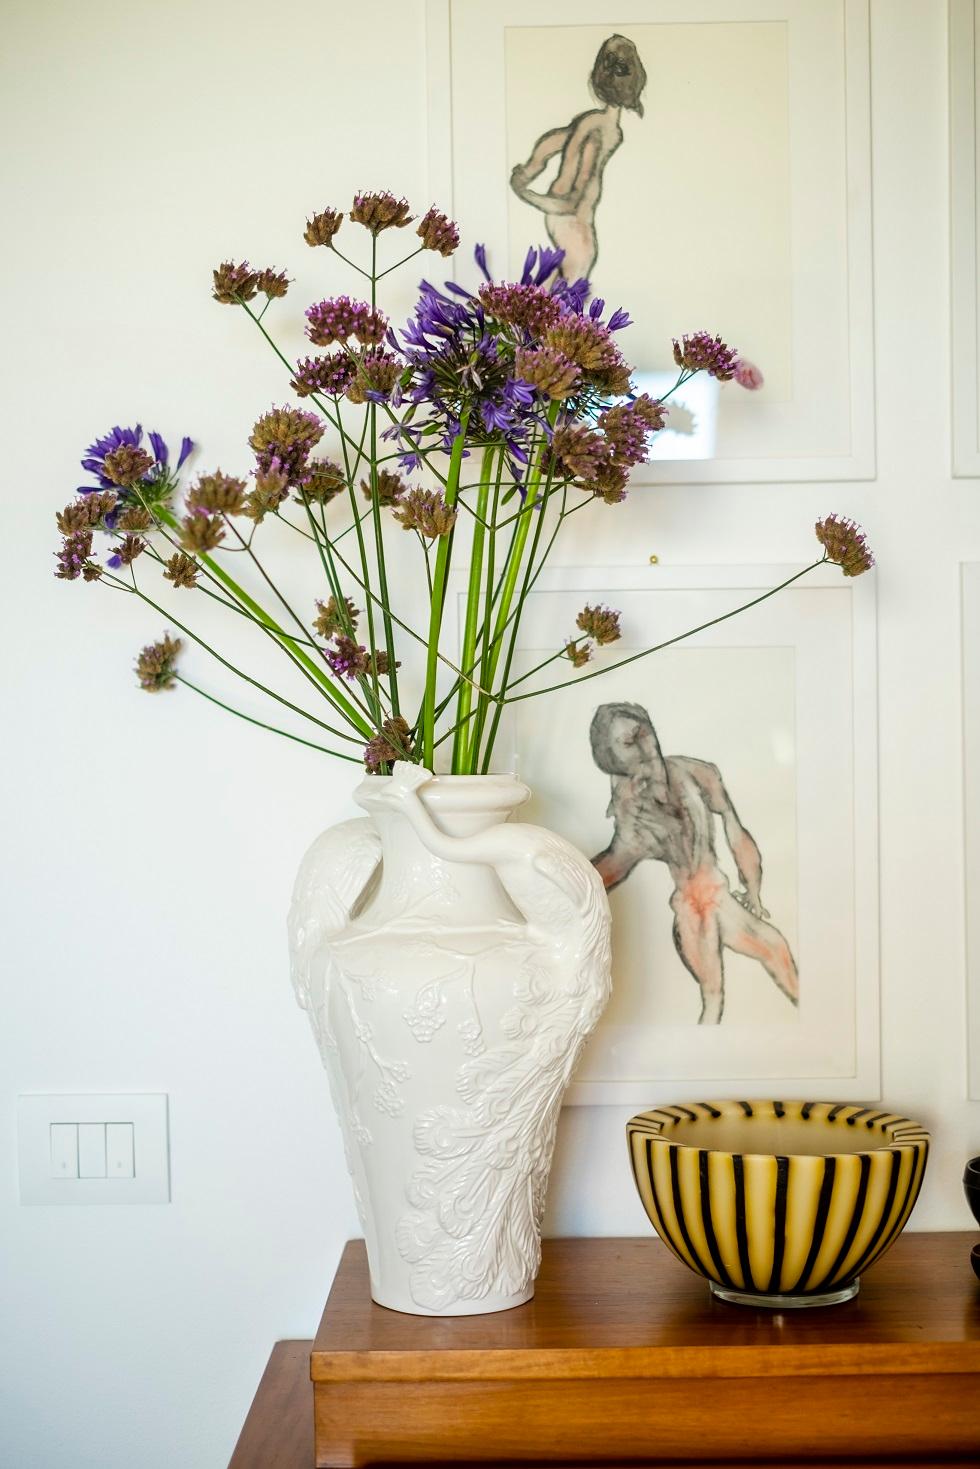 Beauty at its best
this stunning peacock vase is crafted in Italy by local artisans.